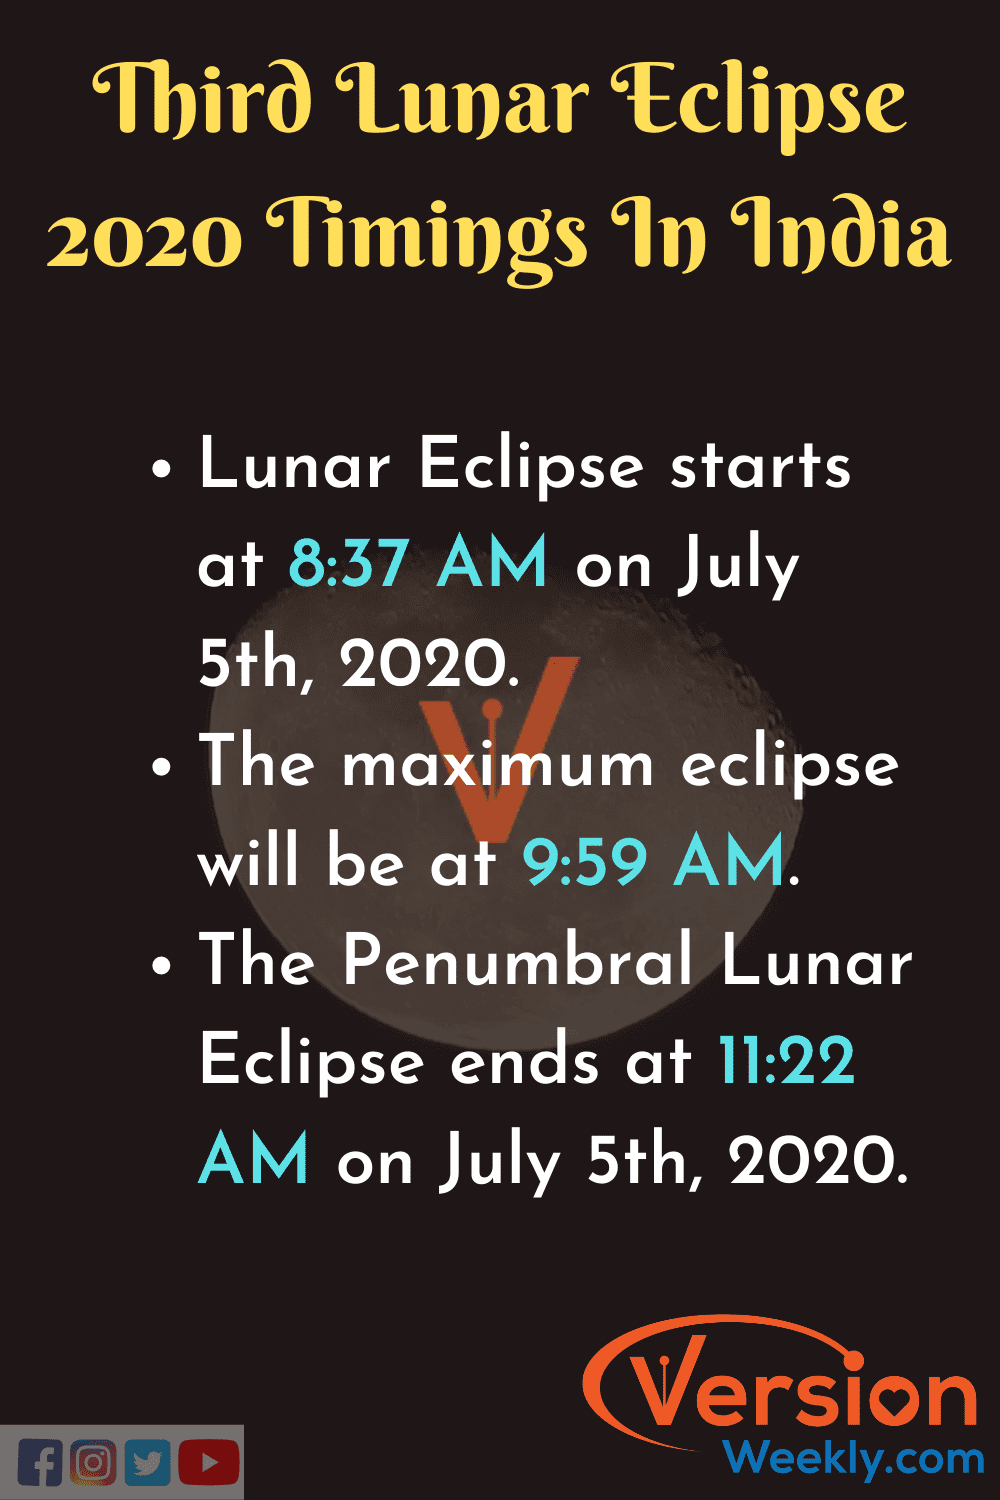 Lunar eclipse 2020 Timings in india